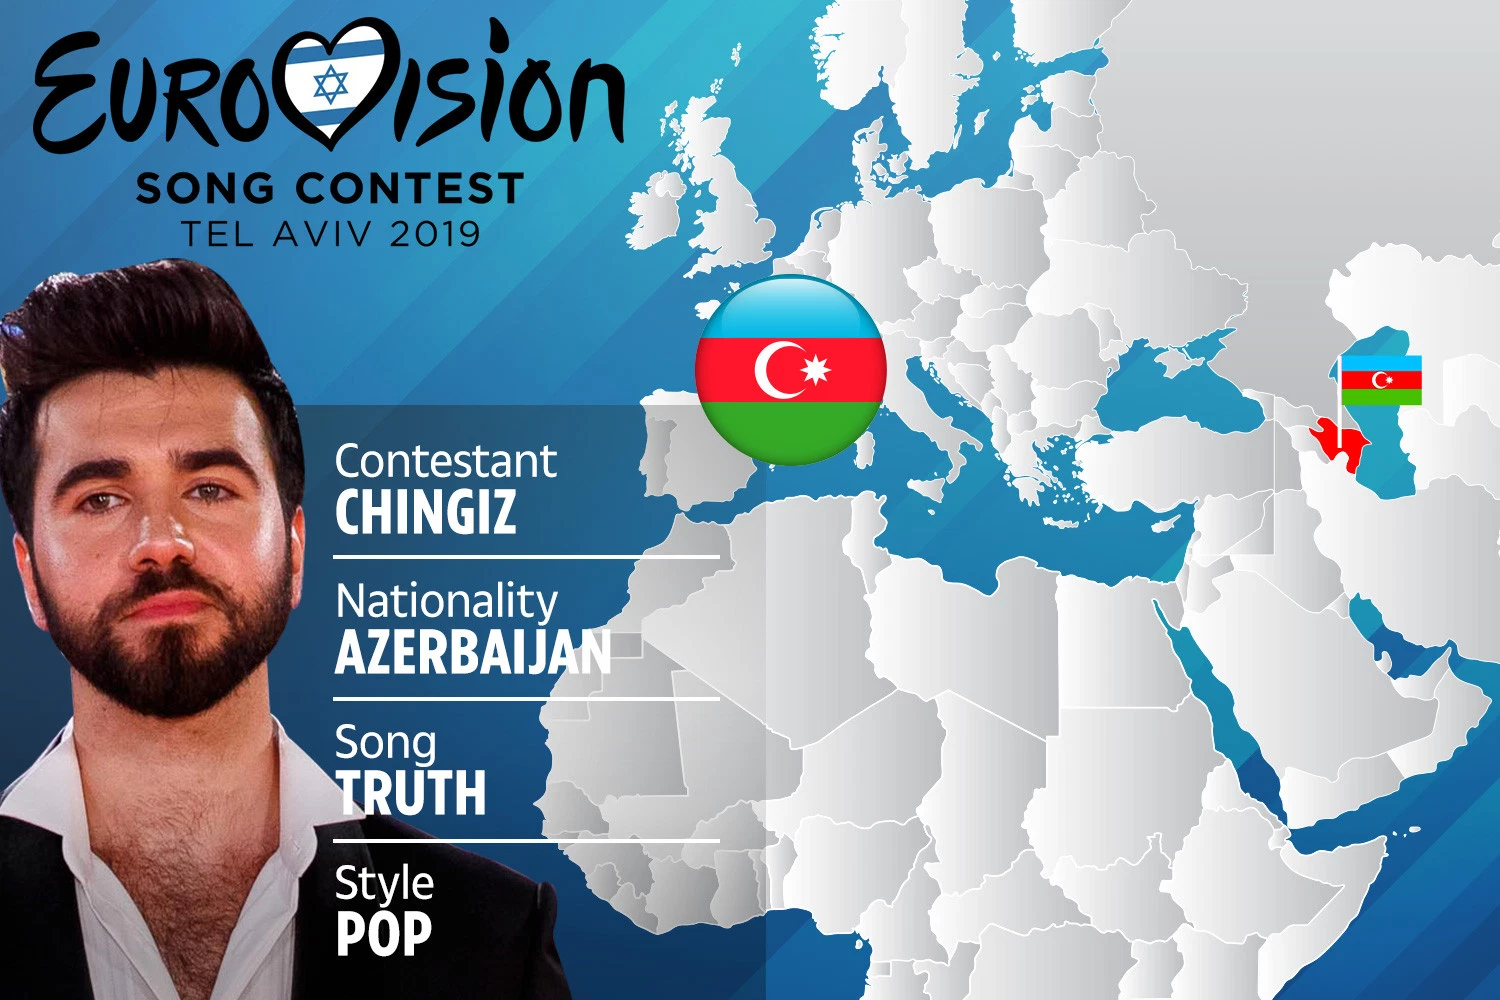 RouteNote artist Chingiz to compete in the Eurovision Song Contest 2019 Finals